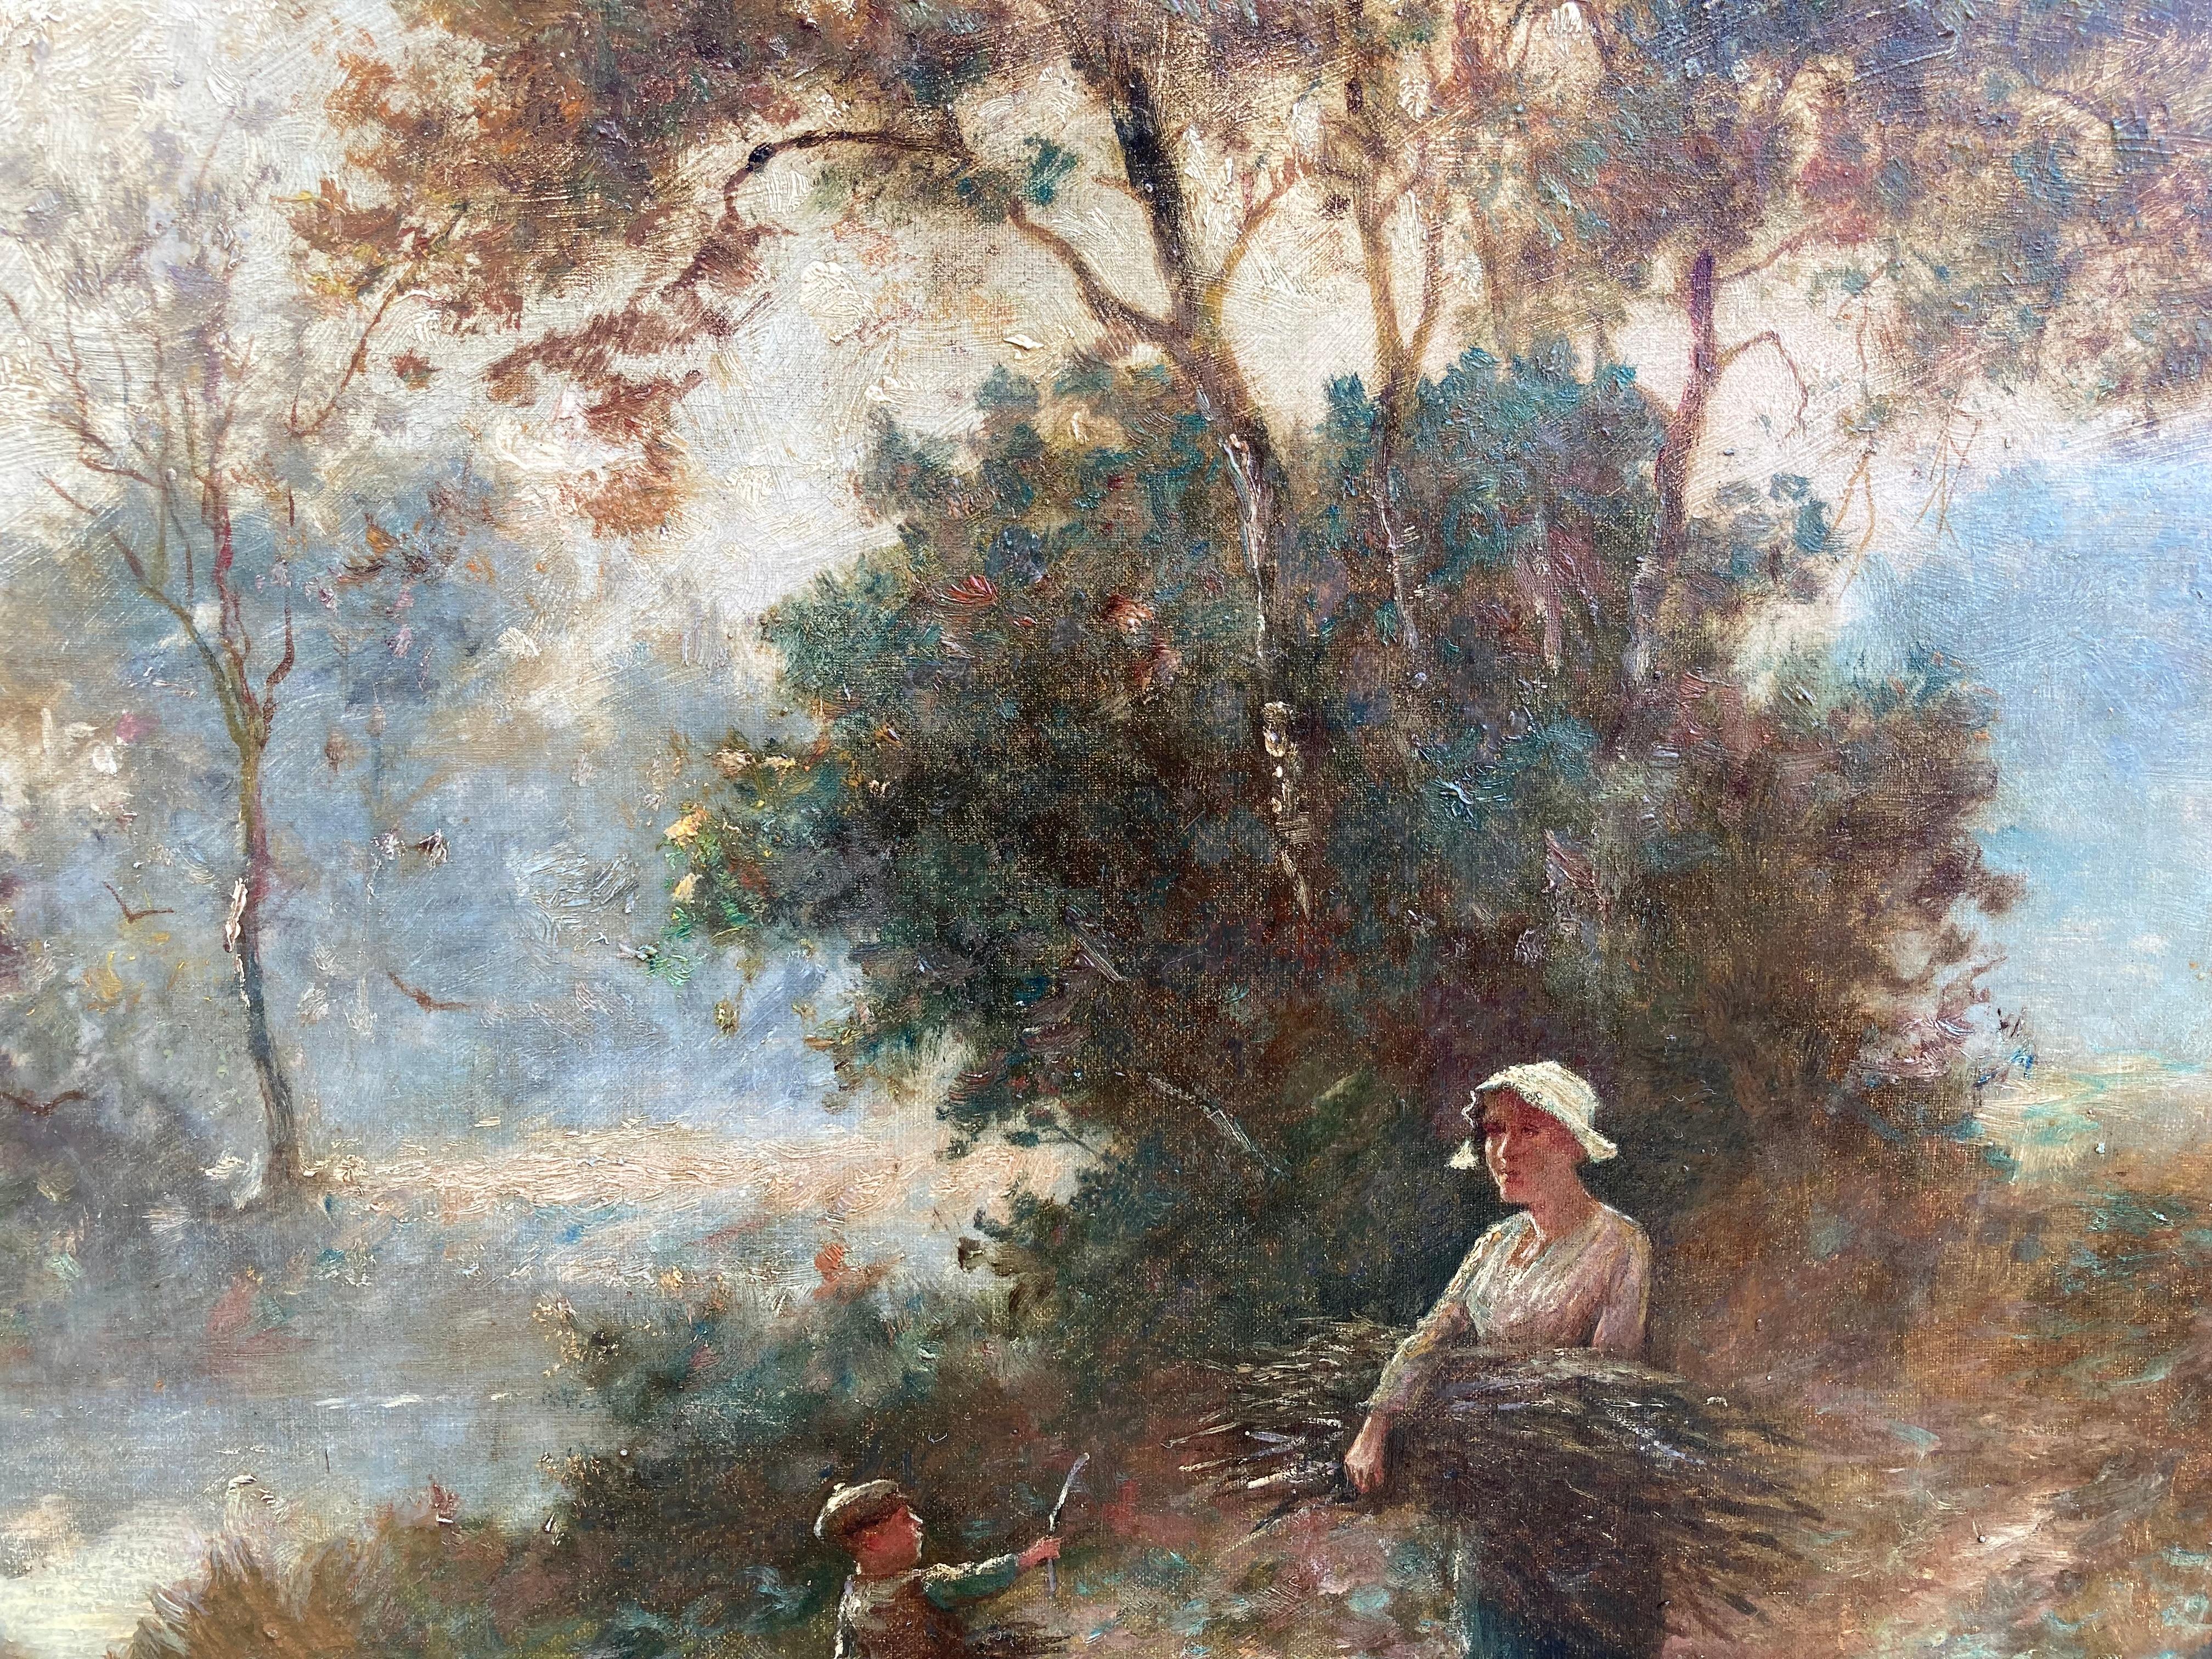 The Kindling Gatherers, 1890 (knighted Royal Academy member, Antique Landscape) - Painting by Alfred East